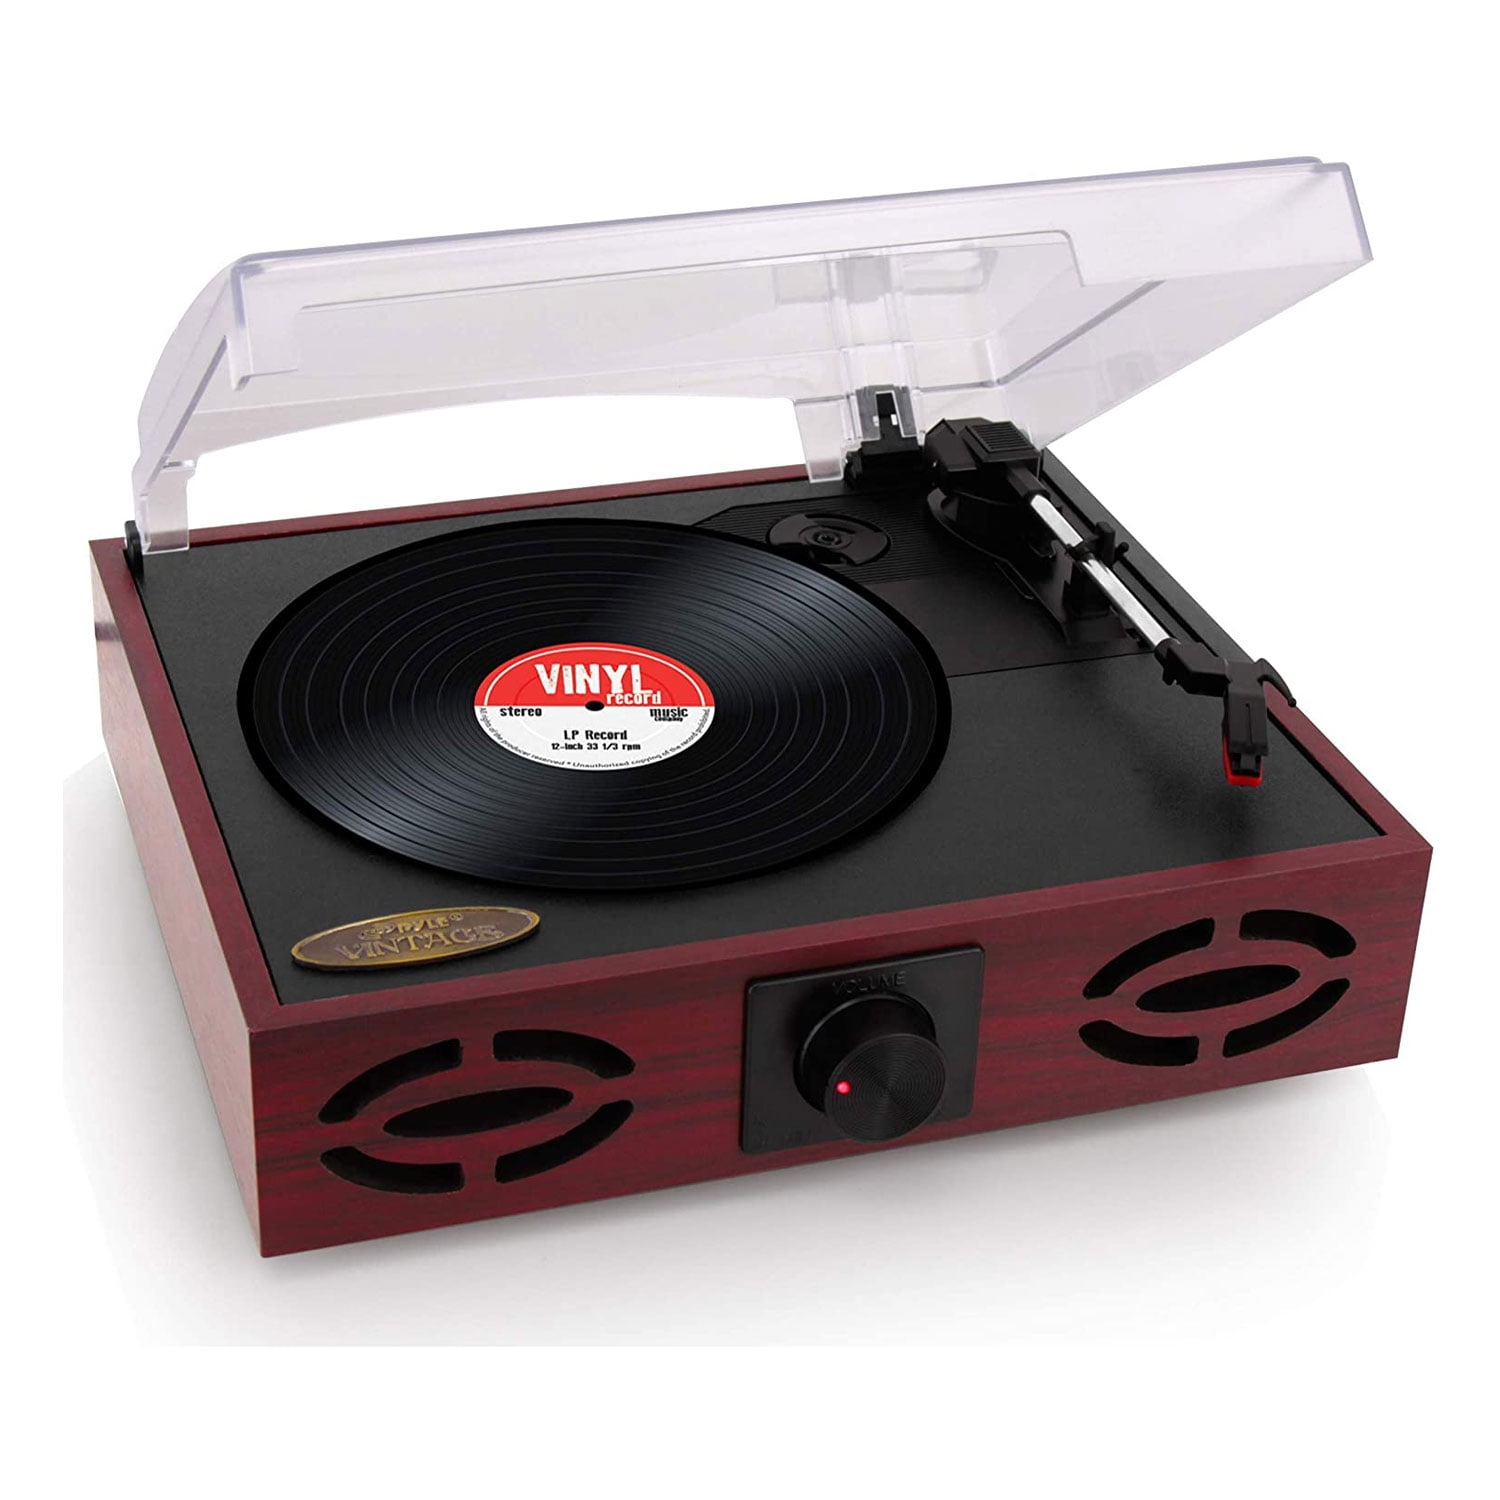 Pyle 3 Speed Vintage Classic Style Record Player with Vinyl to MP3 ...